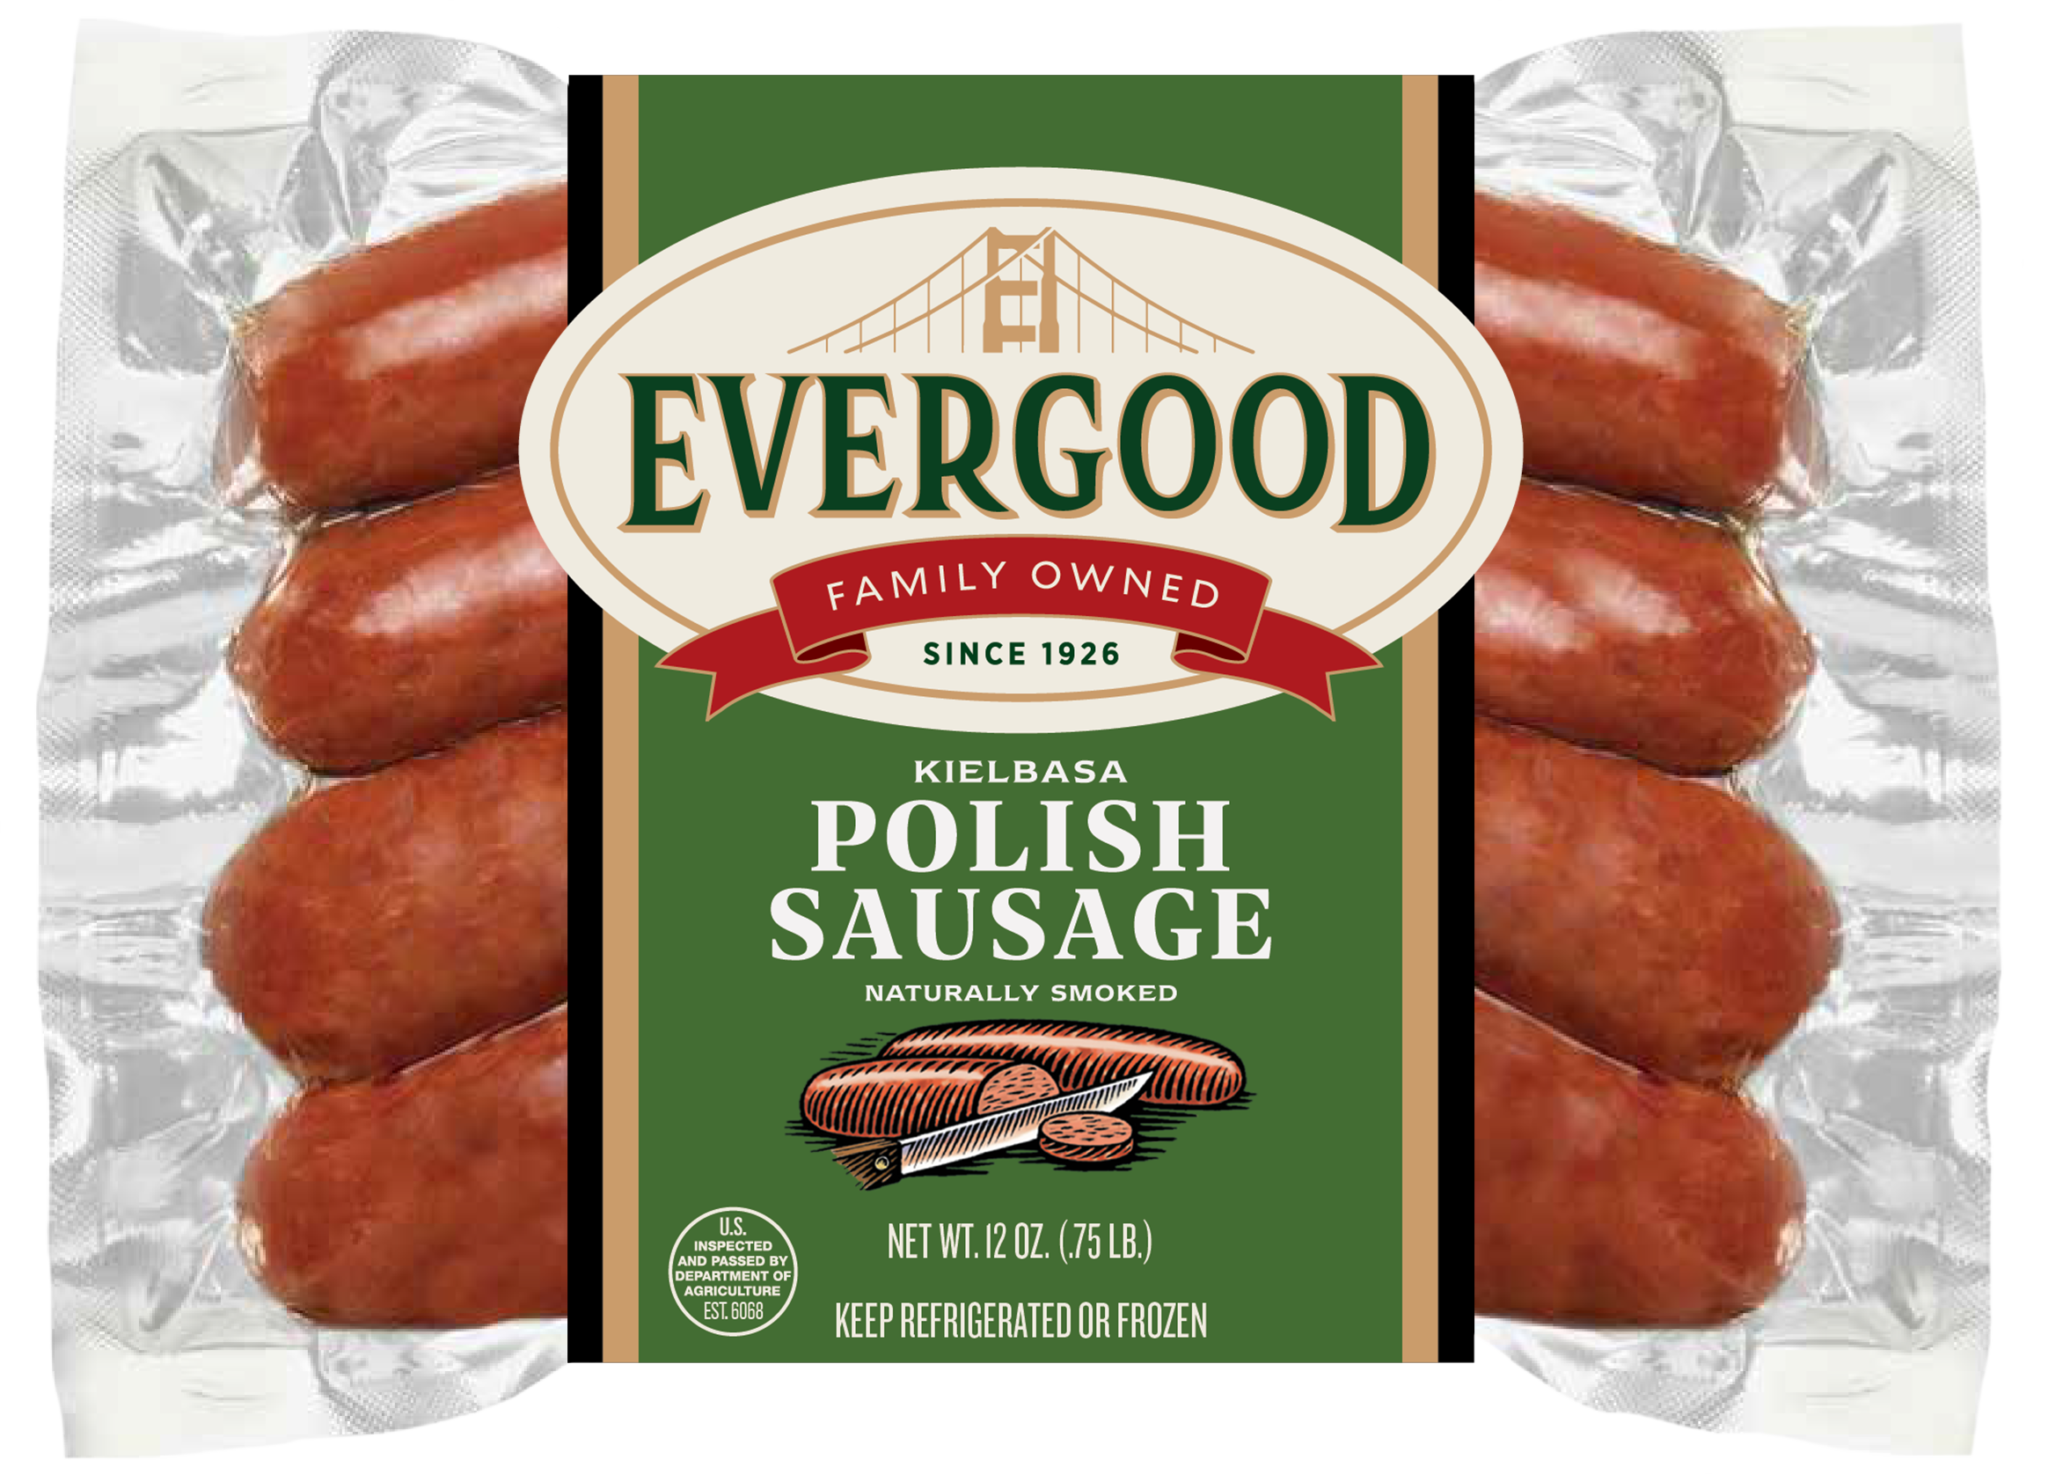 What is the difference between fresh and smoked Polish sausage?